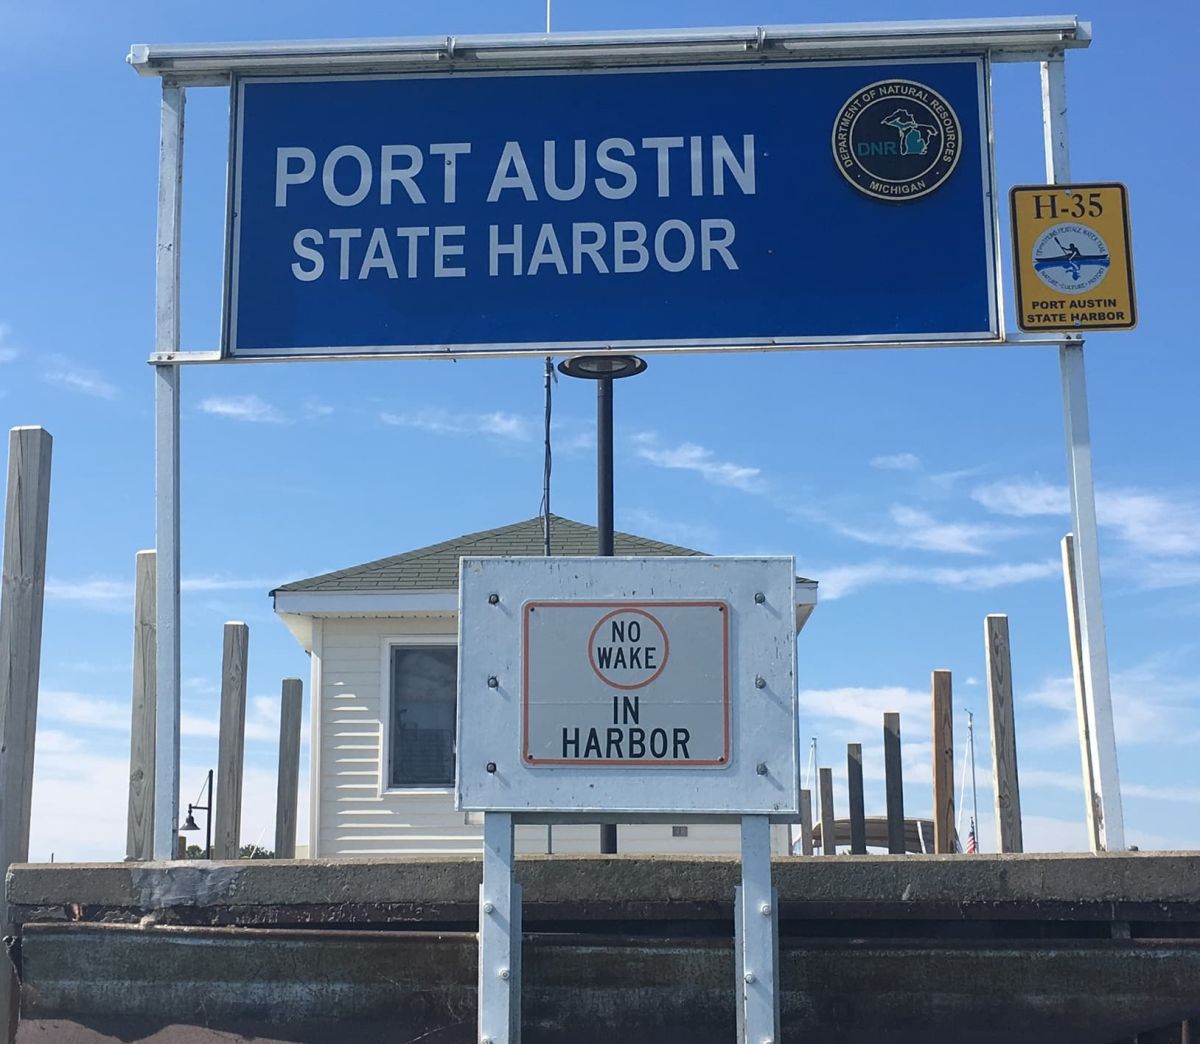 Port Austin State Harbor - Things to Do in Port Austin